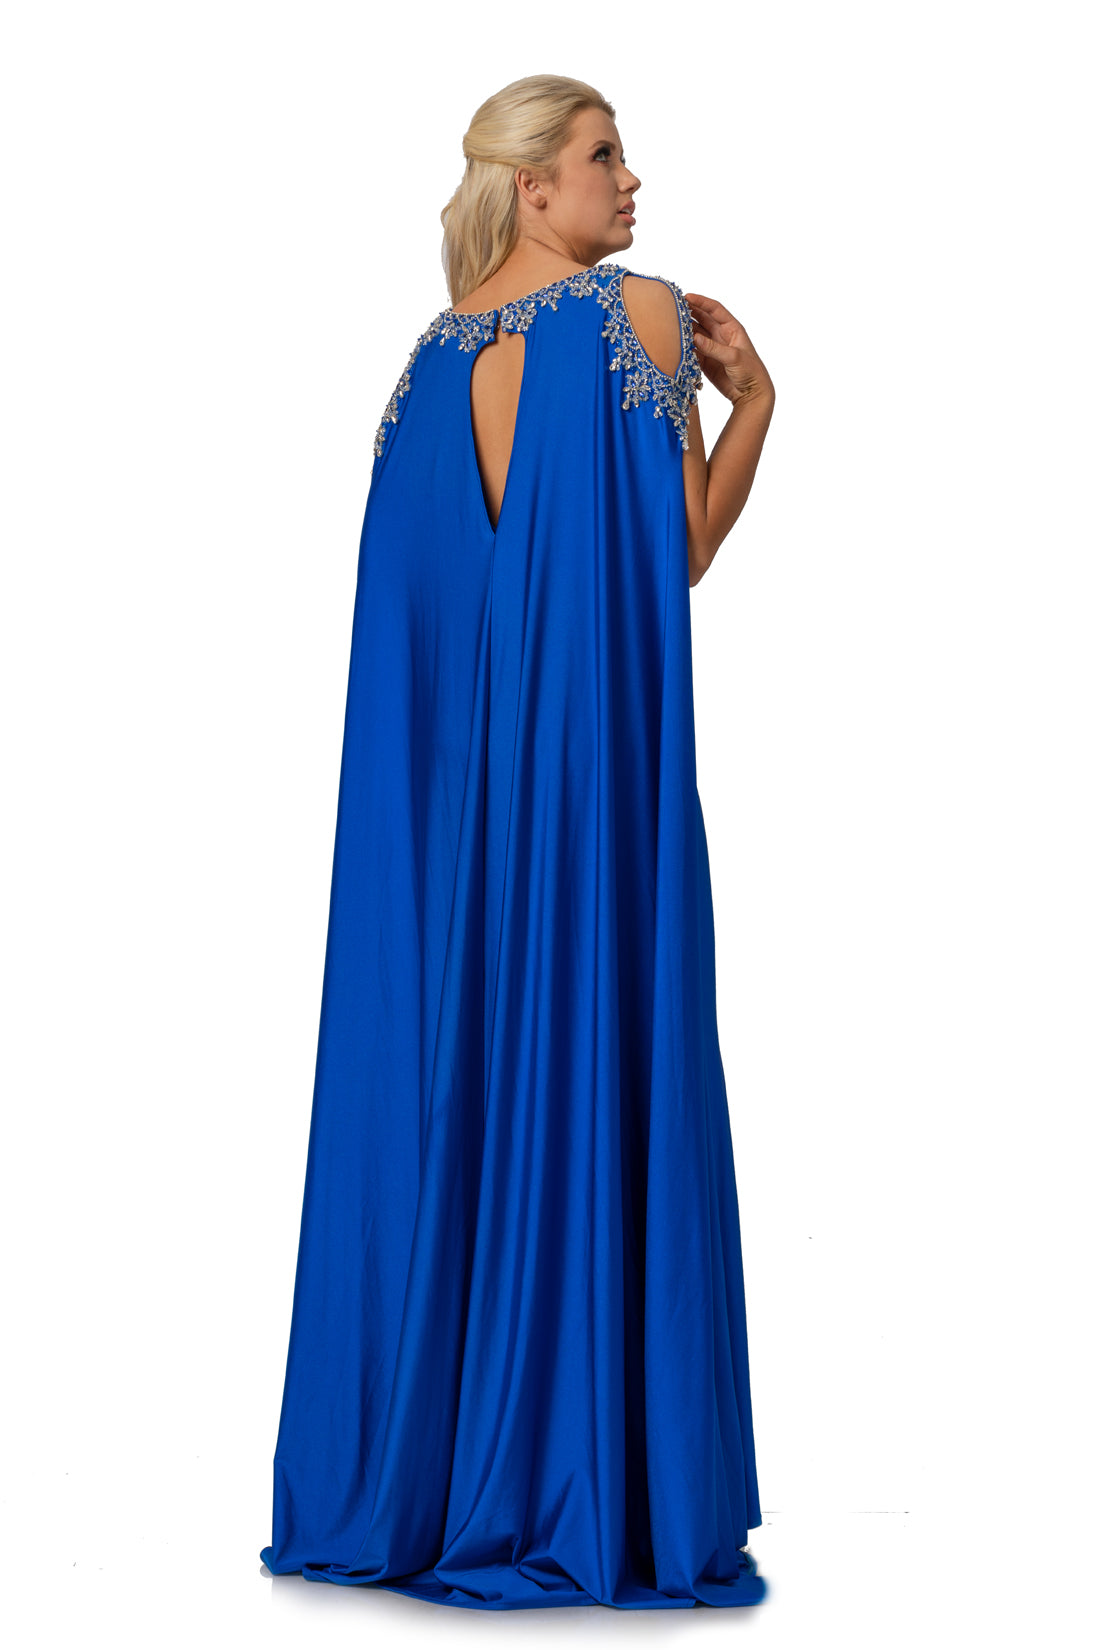 Johnathan Kayne 2075 is a Cape Prom Dress, Pageant Gown & Formal Evening Wear. This 4 way stretch Lycra gown features an Embellished illusion plunging high neckline. Embellished Over Cape Features Shoulder cutouts with a keyhole cutout in the back. skirt features a slit.